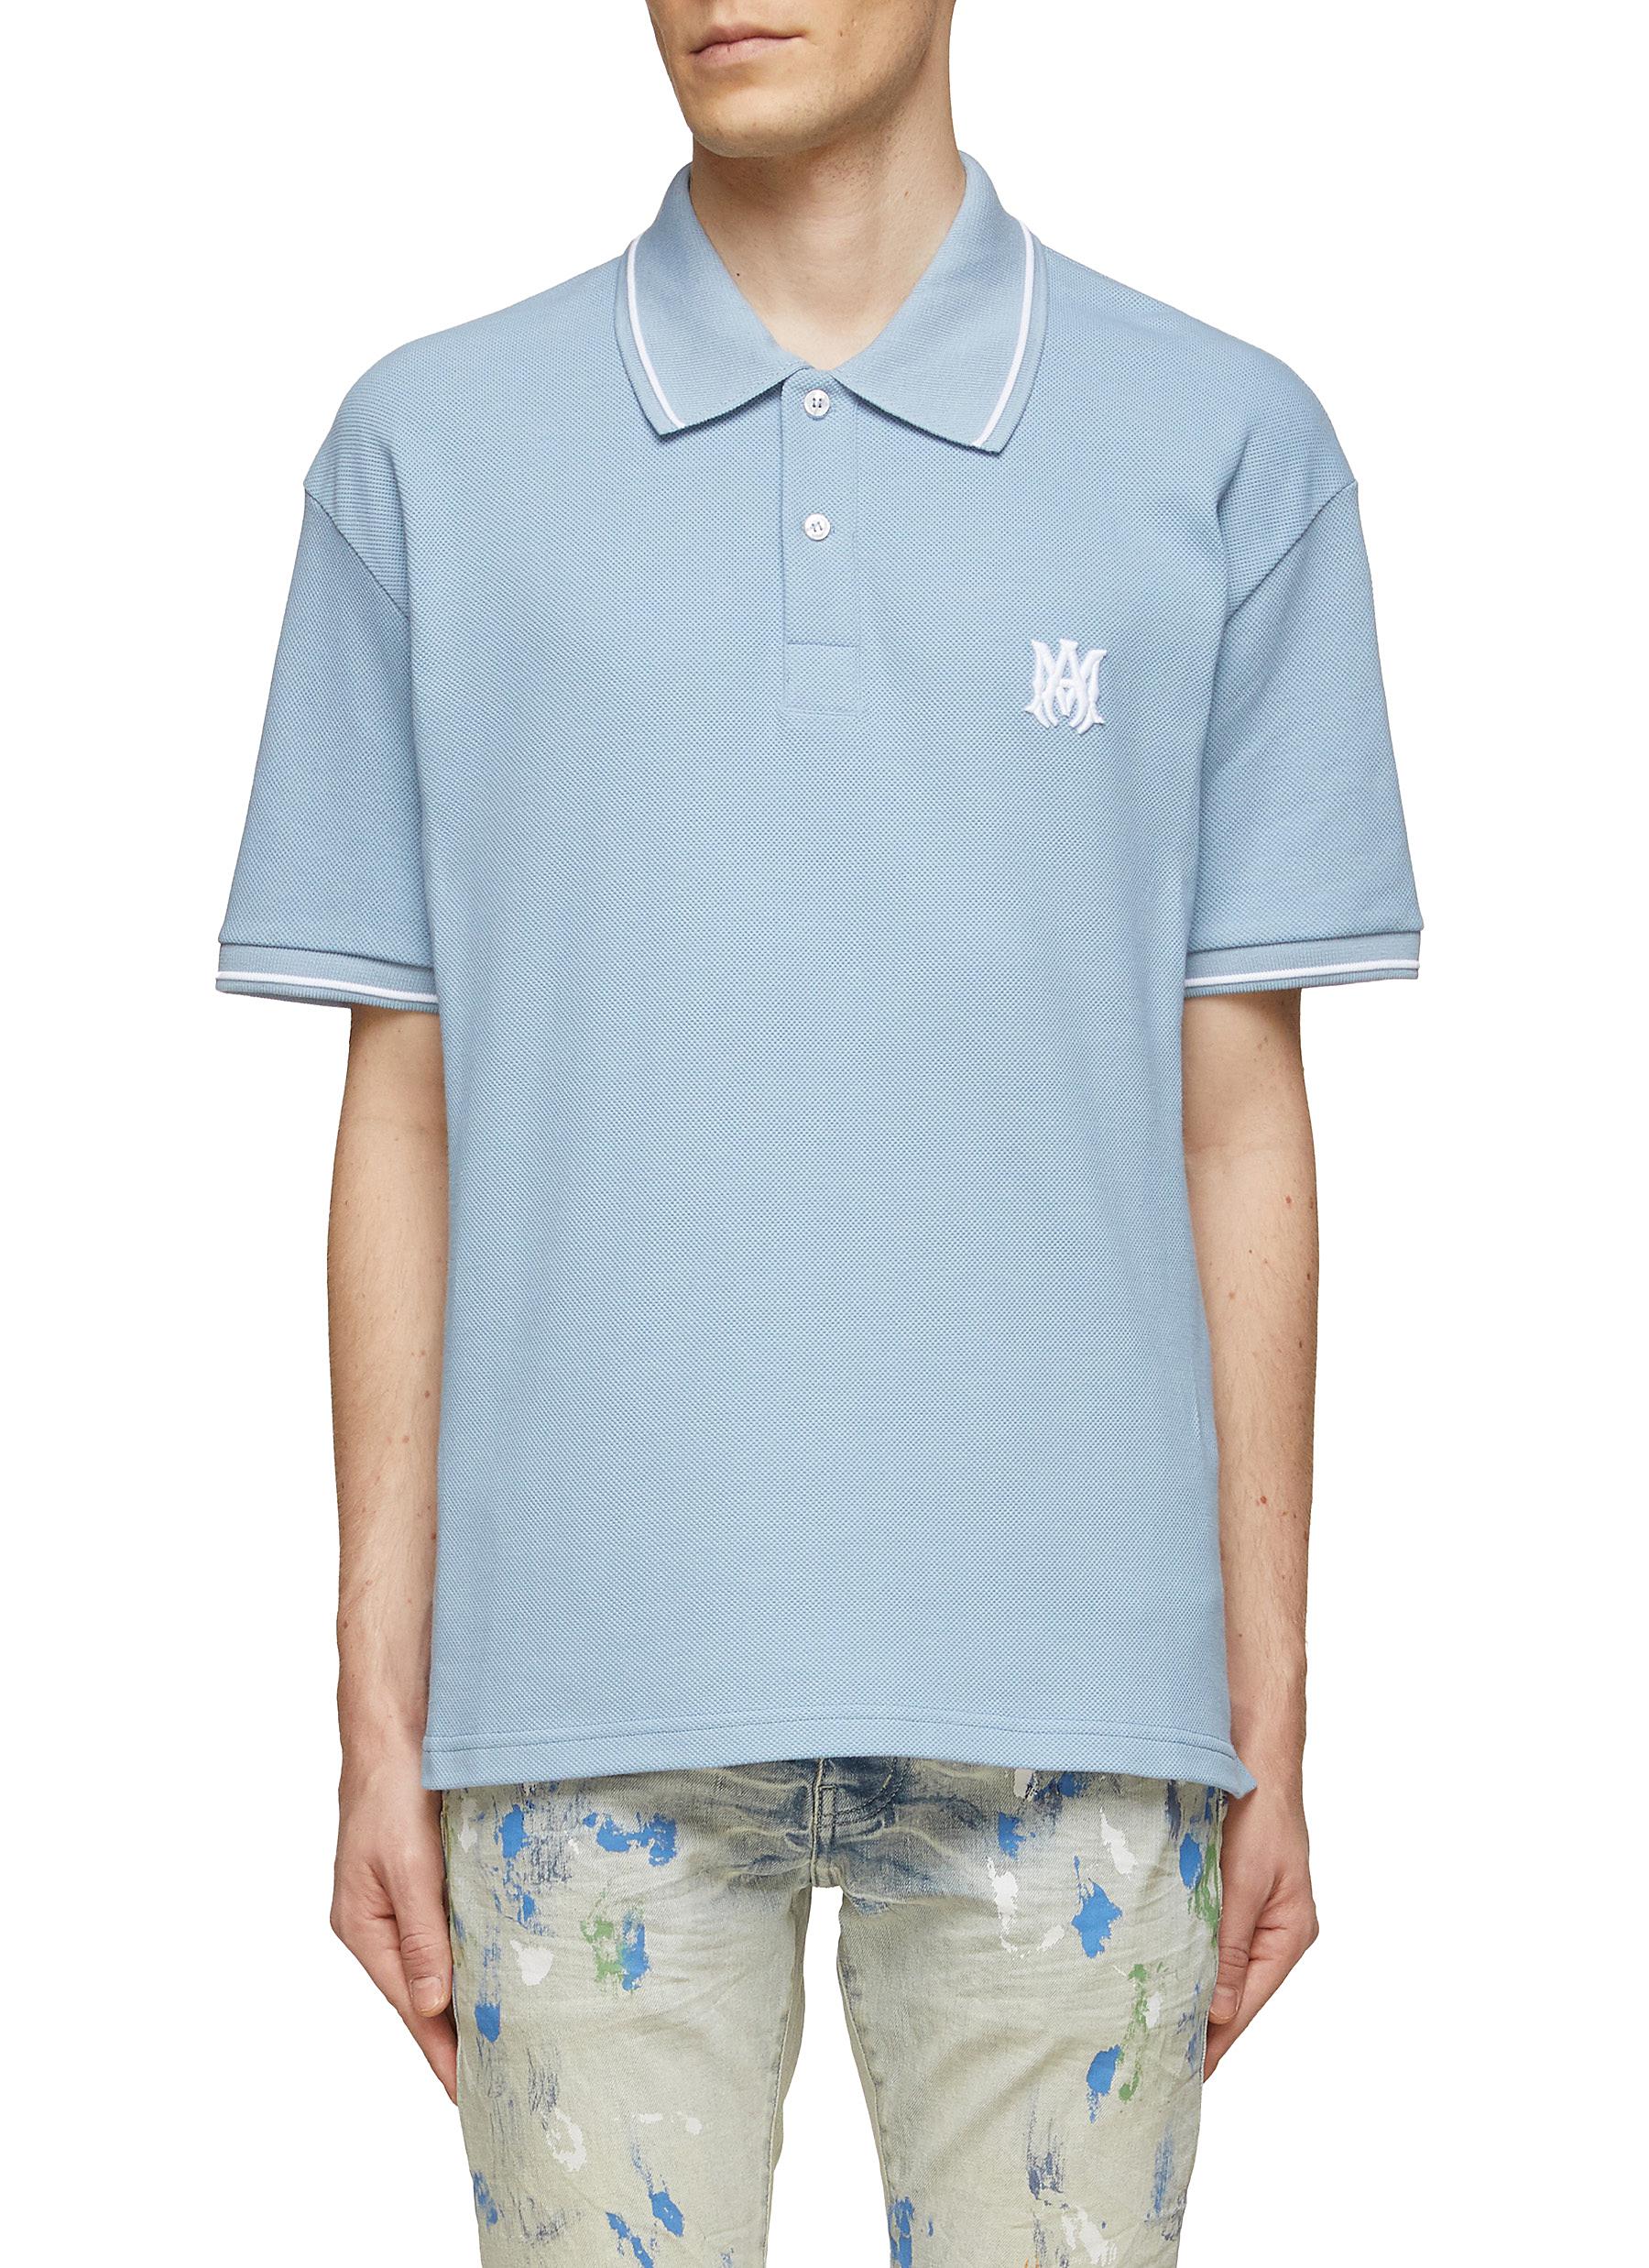 MA CHEST LOGO CONTRAST PIPING COTTON POLO SHIRT